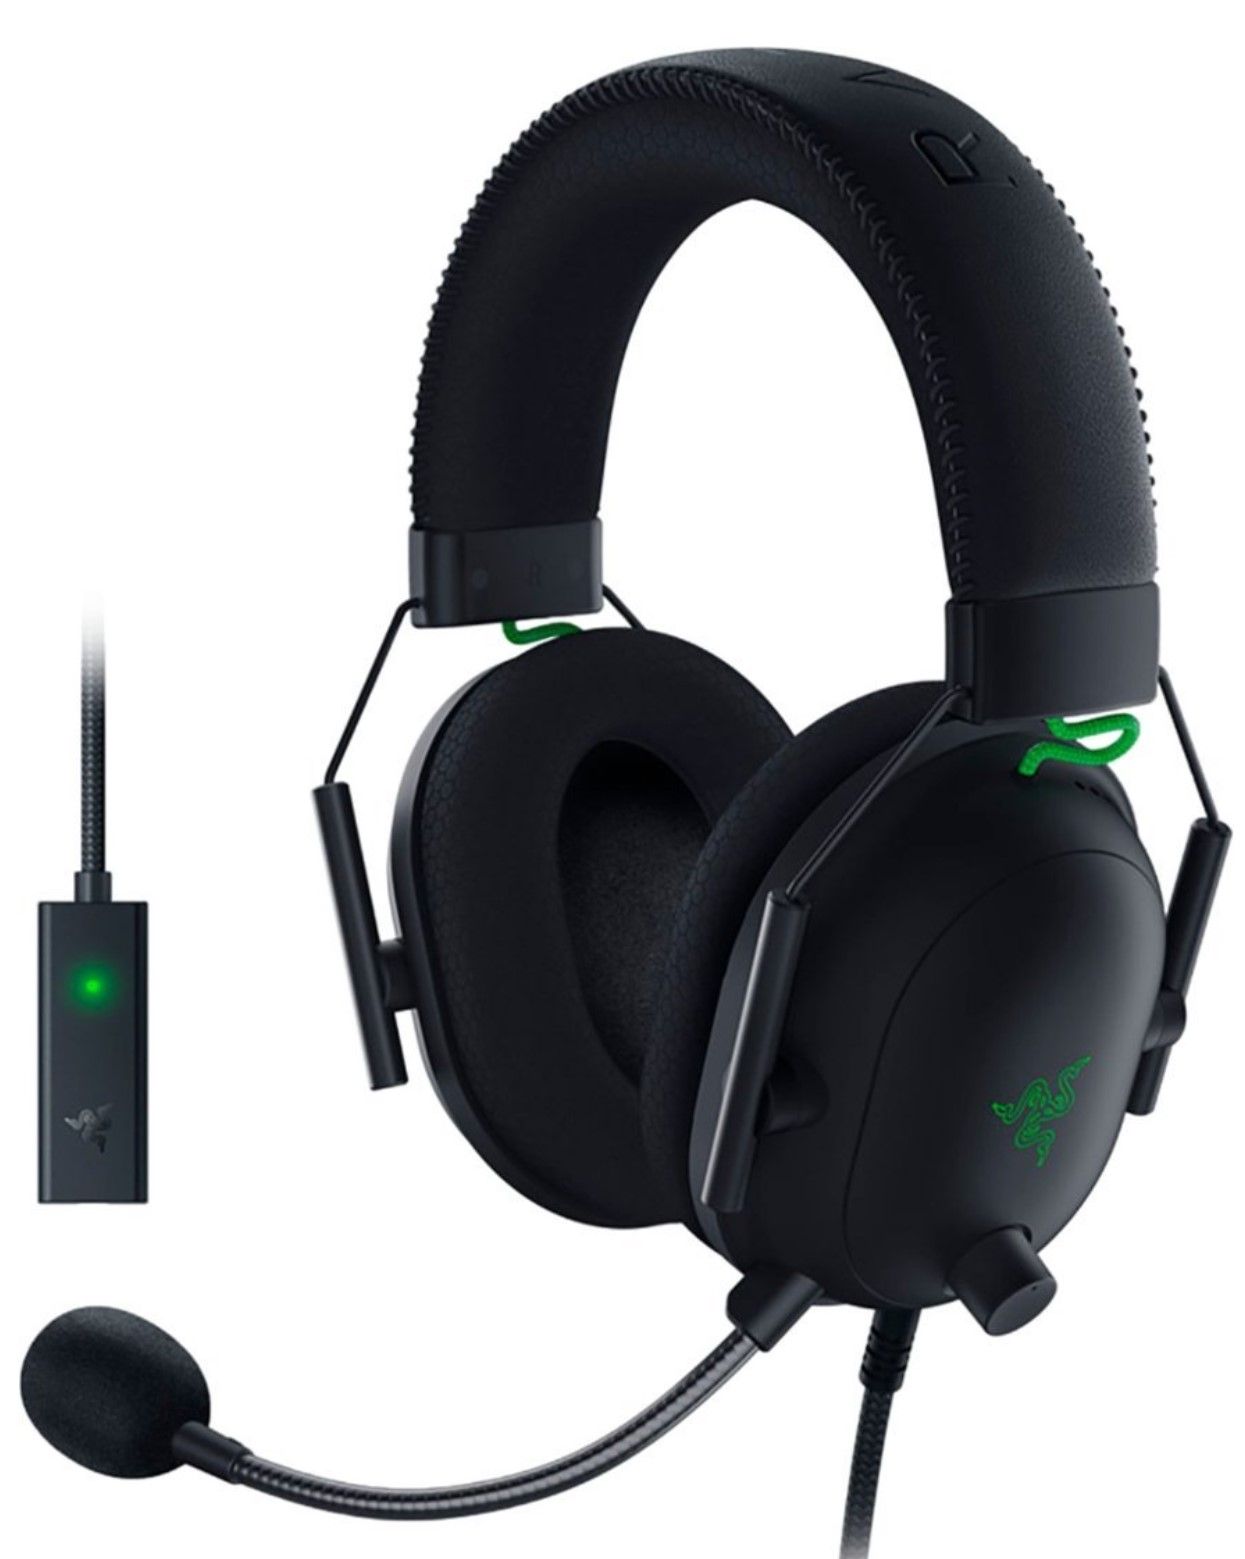 Wired Vs. Wireless Gaming Headsets: the Pros and Cons of Each